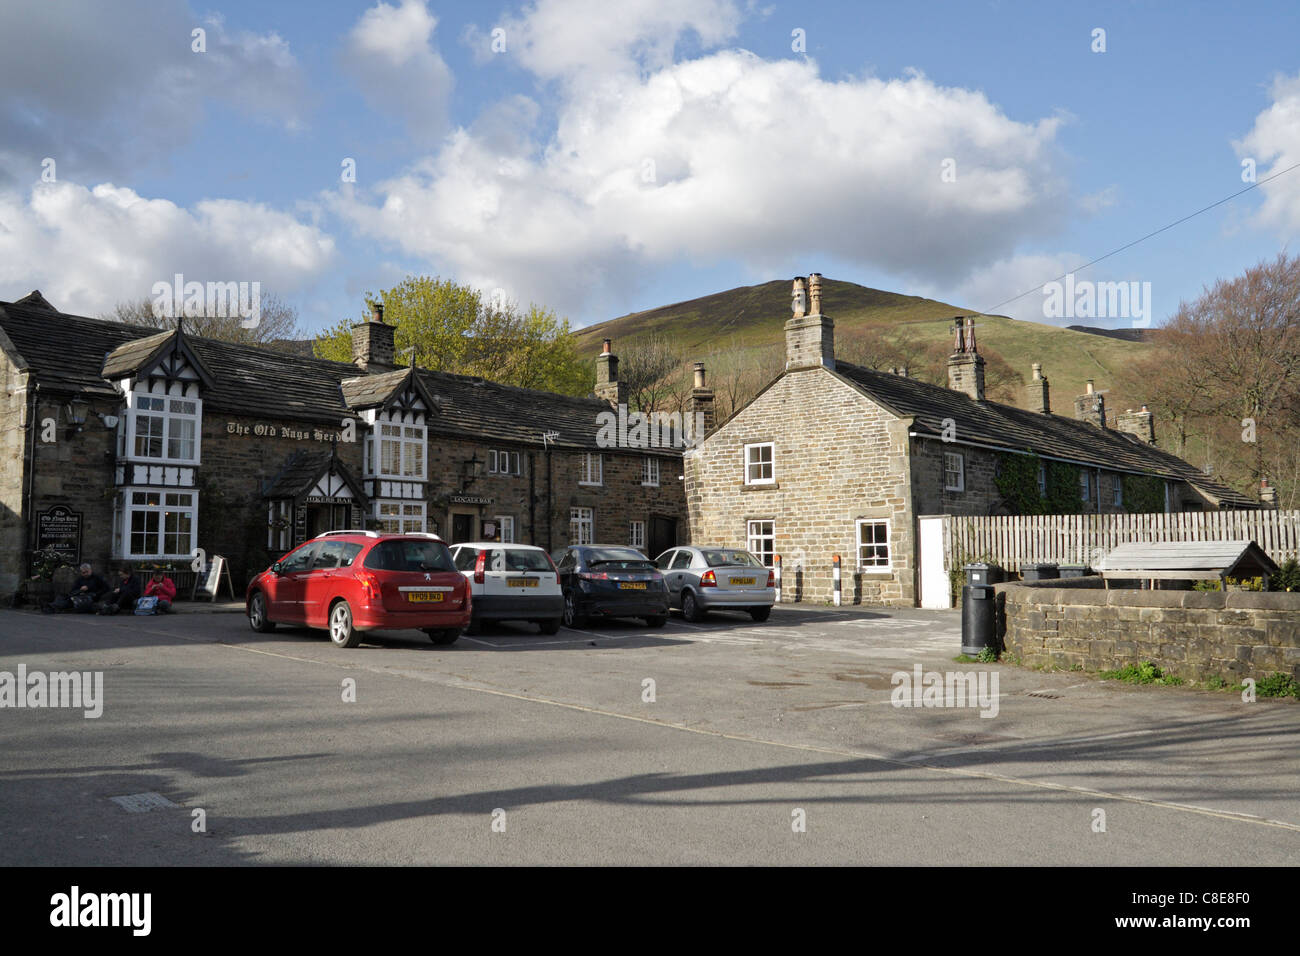 The Old Nags Head pub, Edale the start end of the Pennine Way footpath, Derbyshire Peak District England UK English village Stock Photo